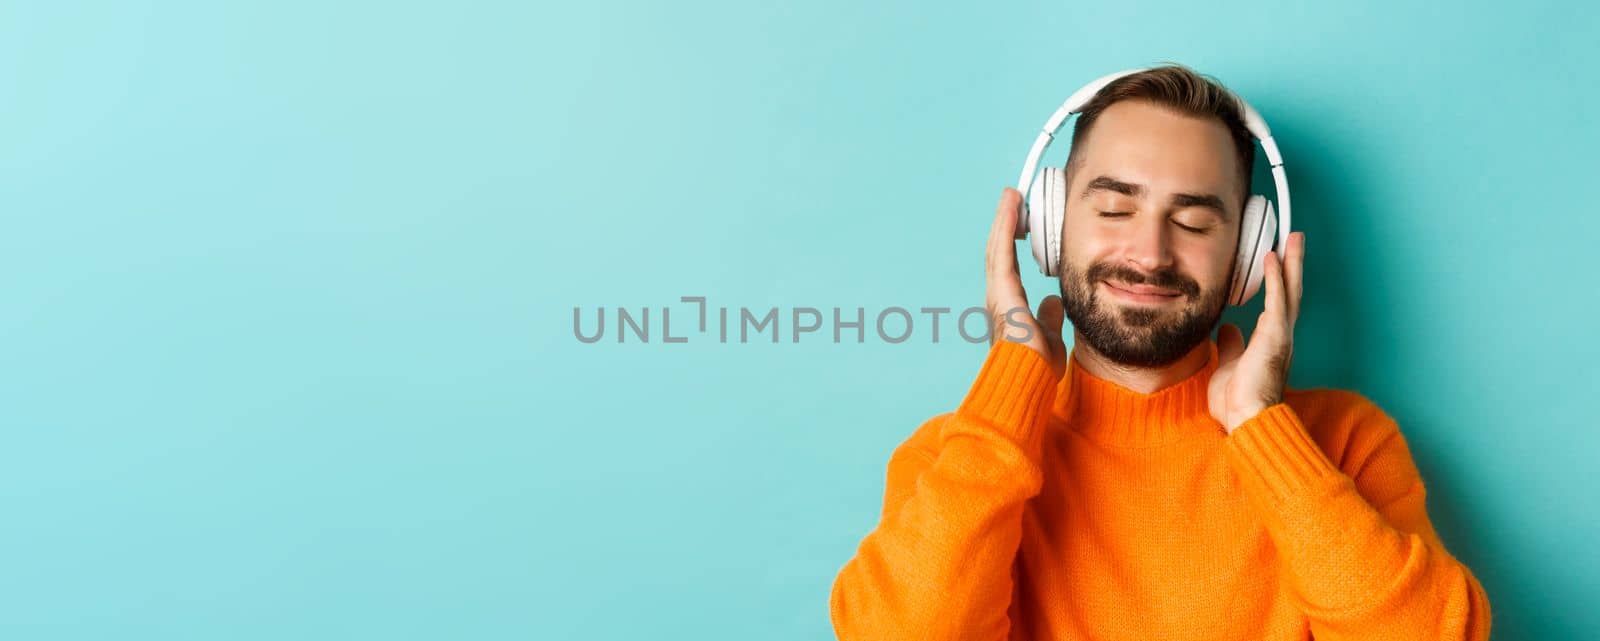 Close-up of handsome modern man listening music in headphones, standing in orange sweater over turquoise background.